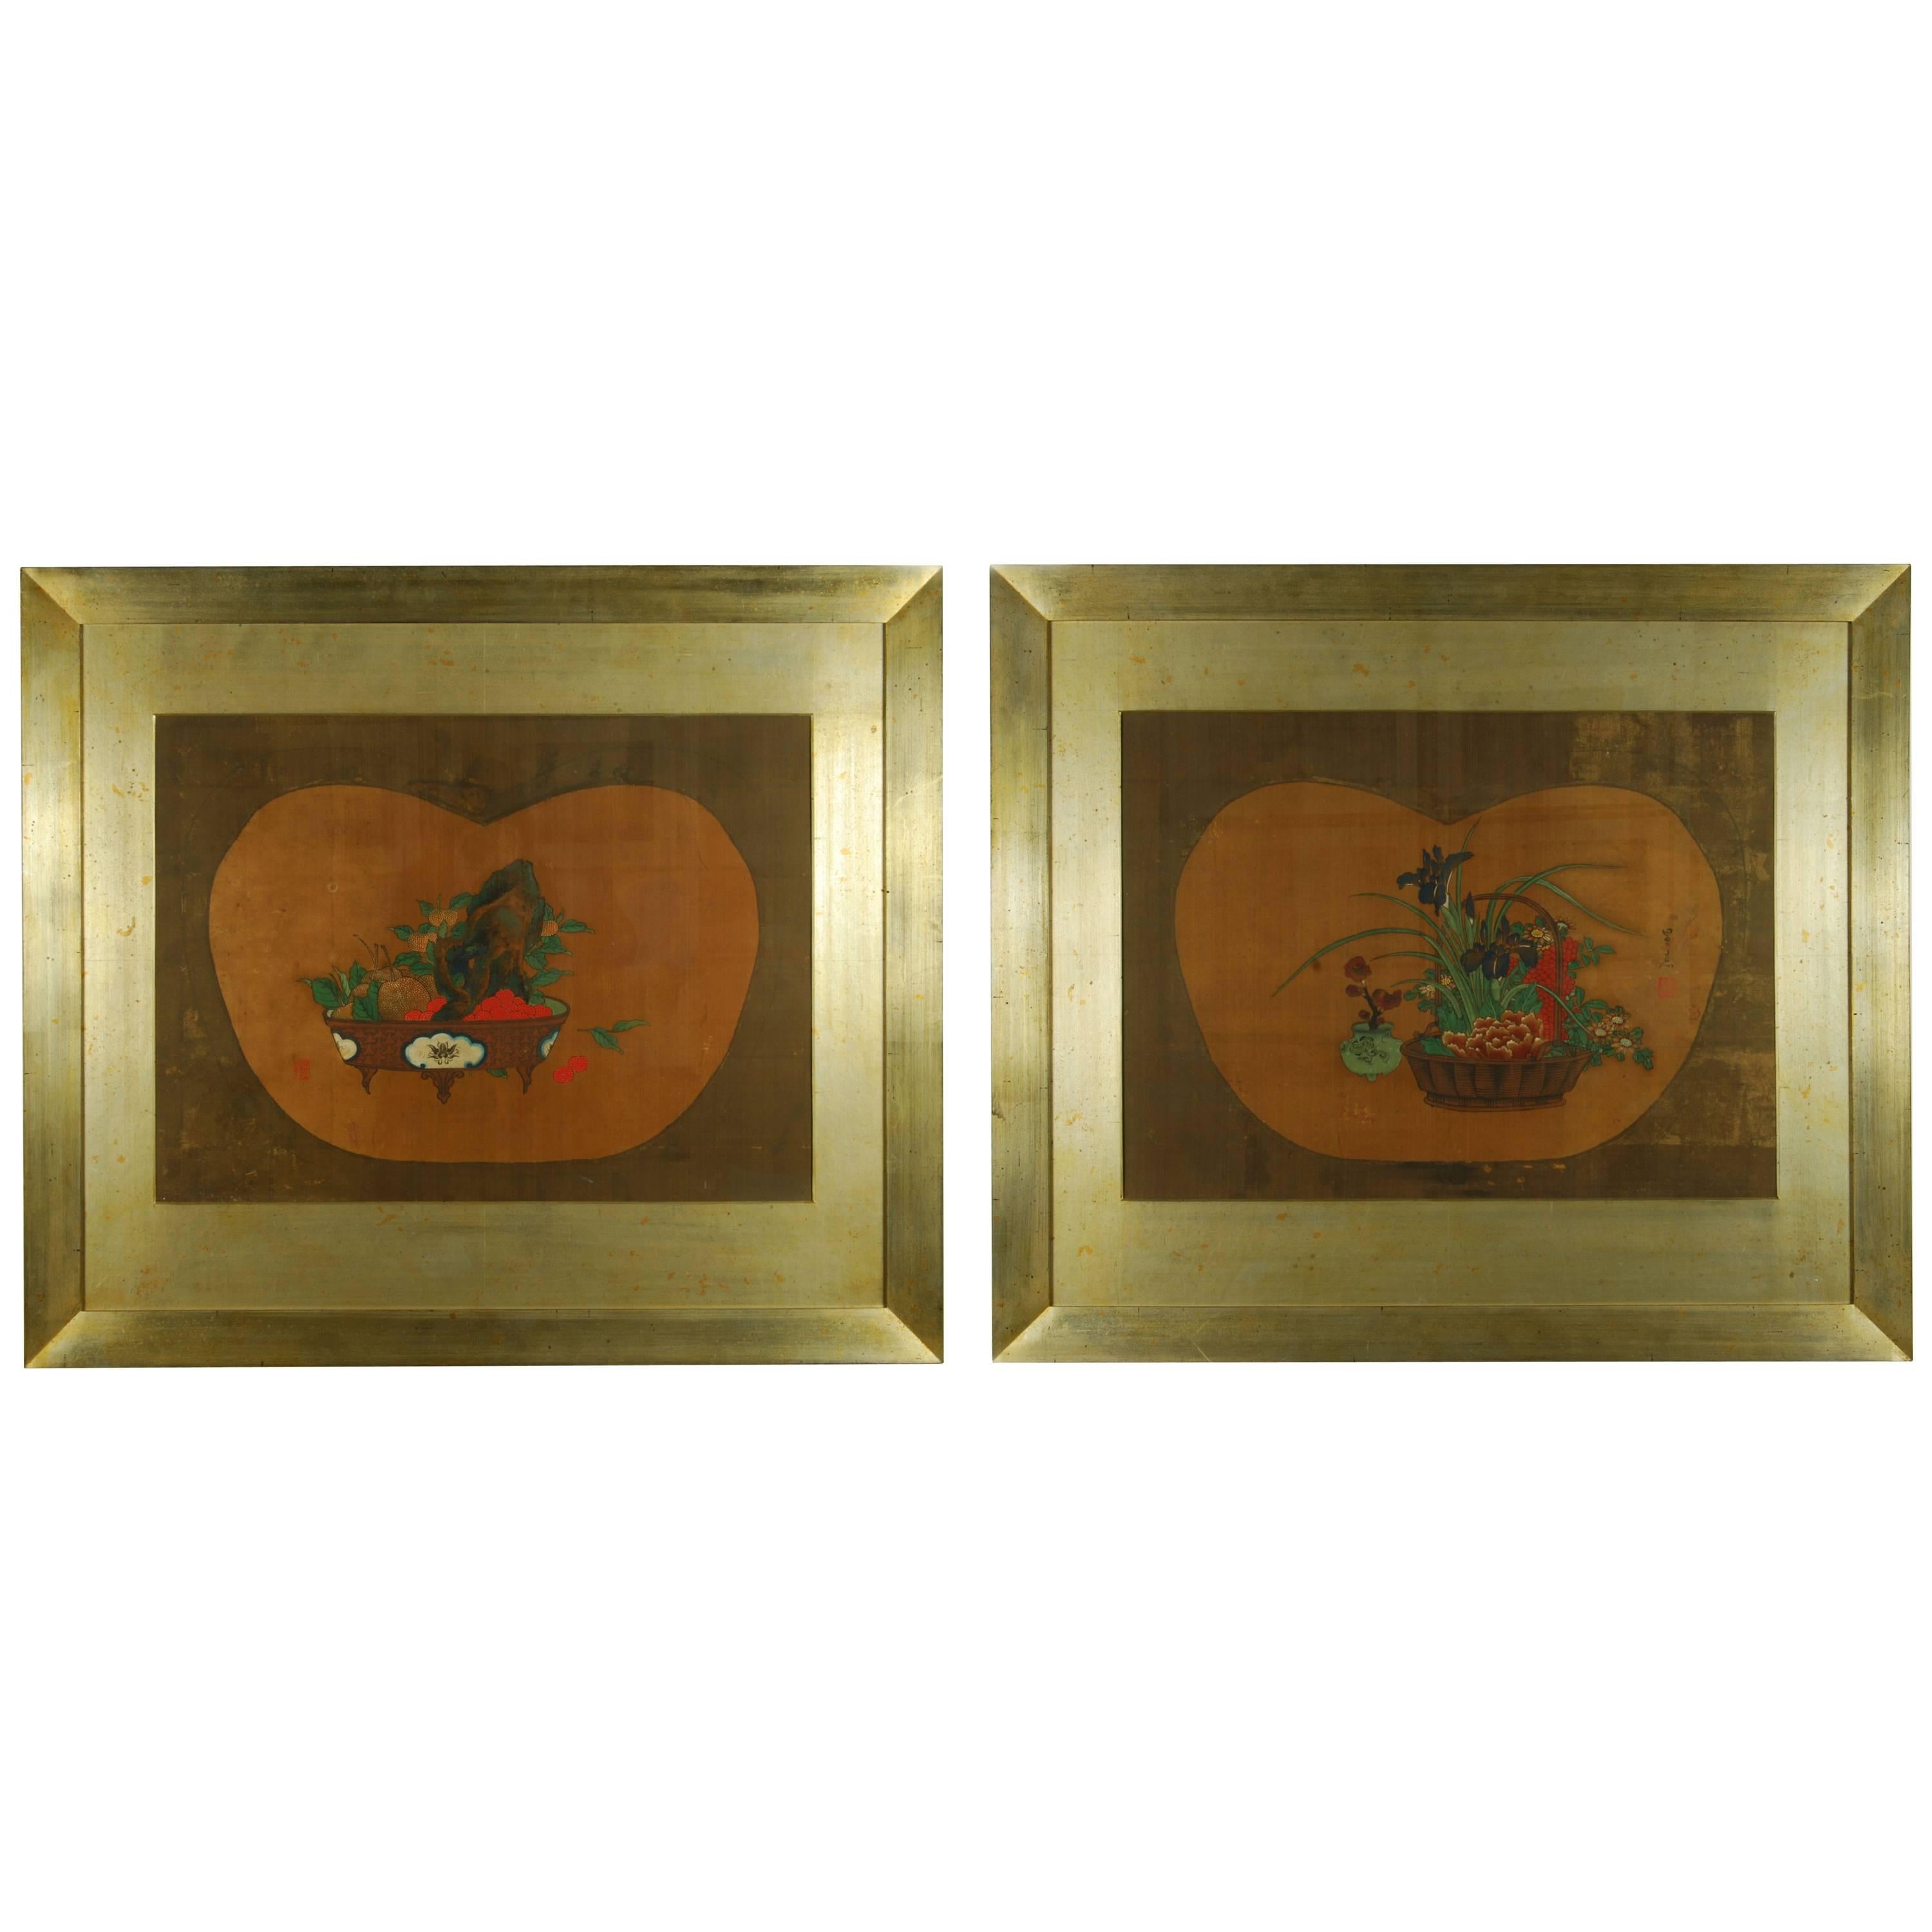 Pair of Antique Japanese Flower Paintings by Yanagisawa Kien, circa 18th Century For Sale